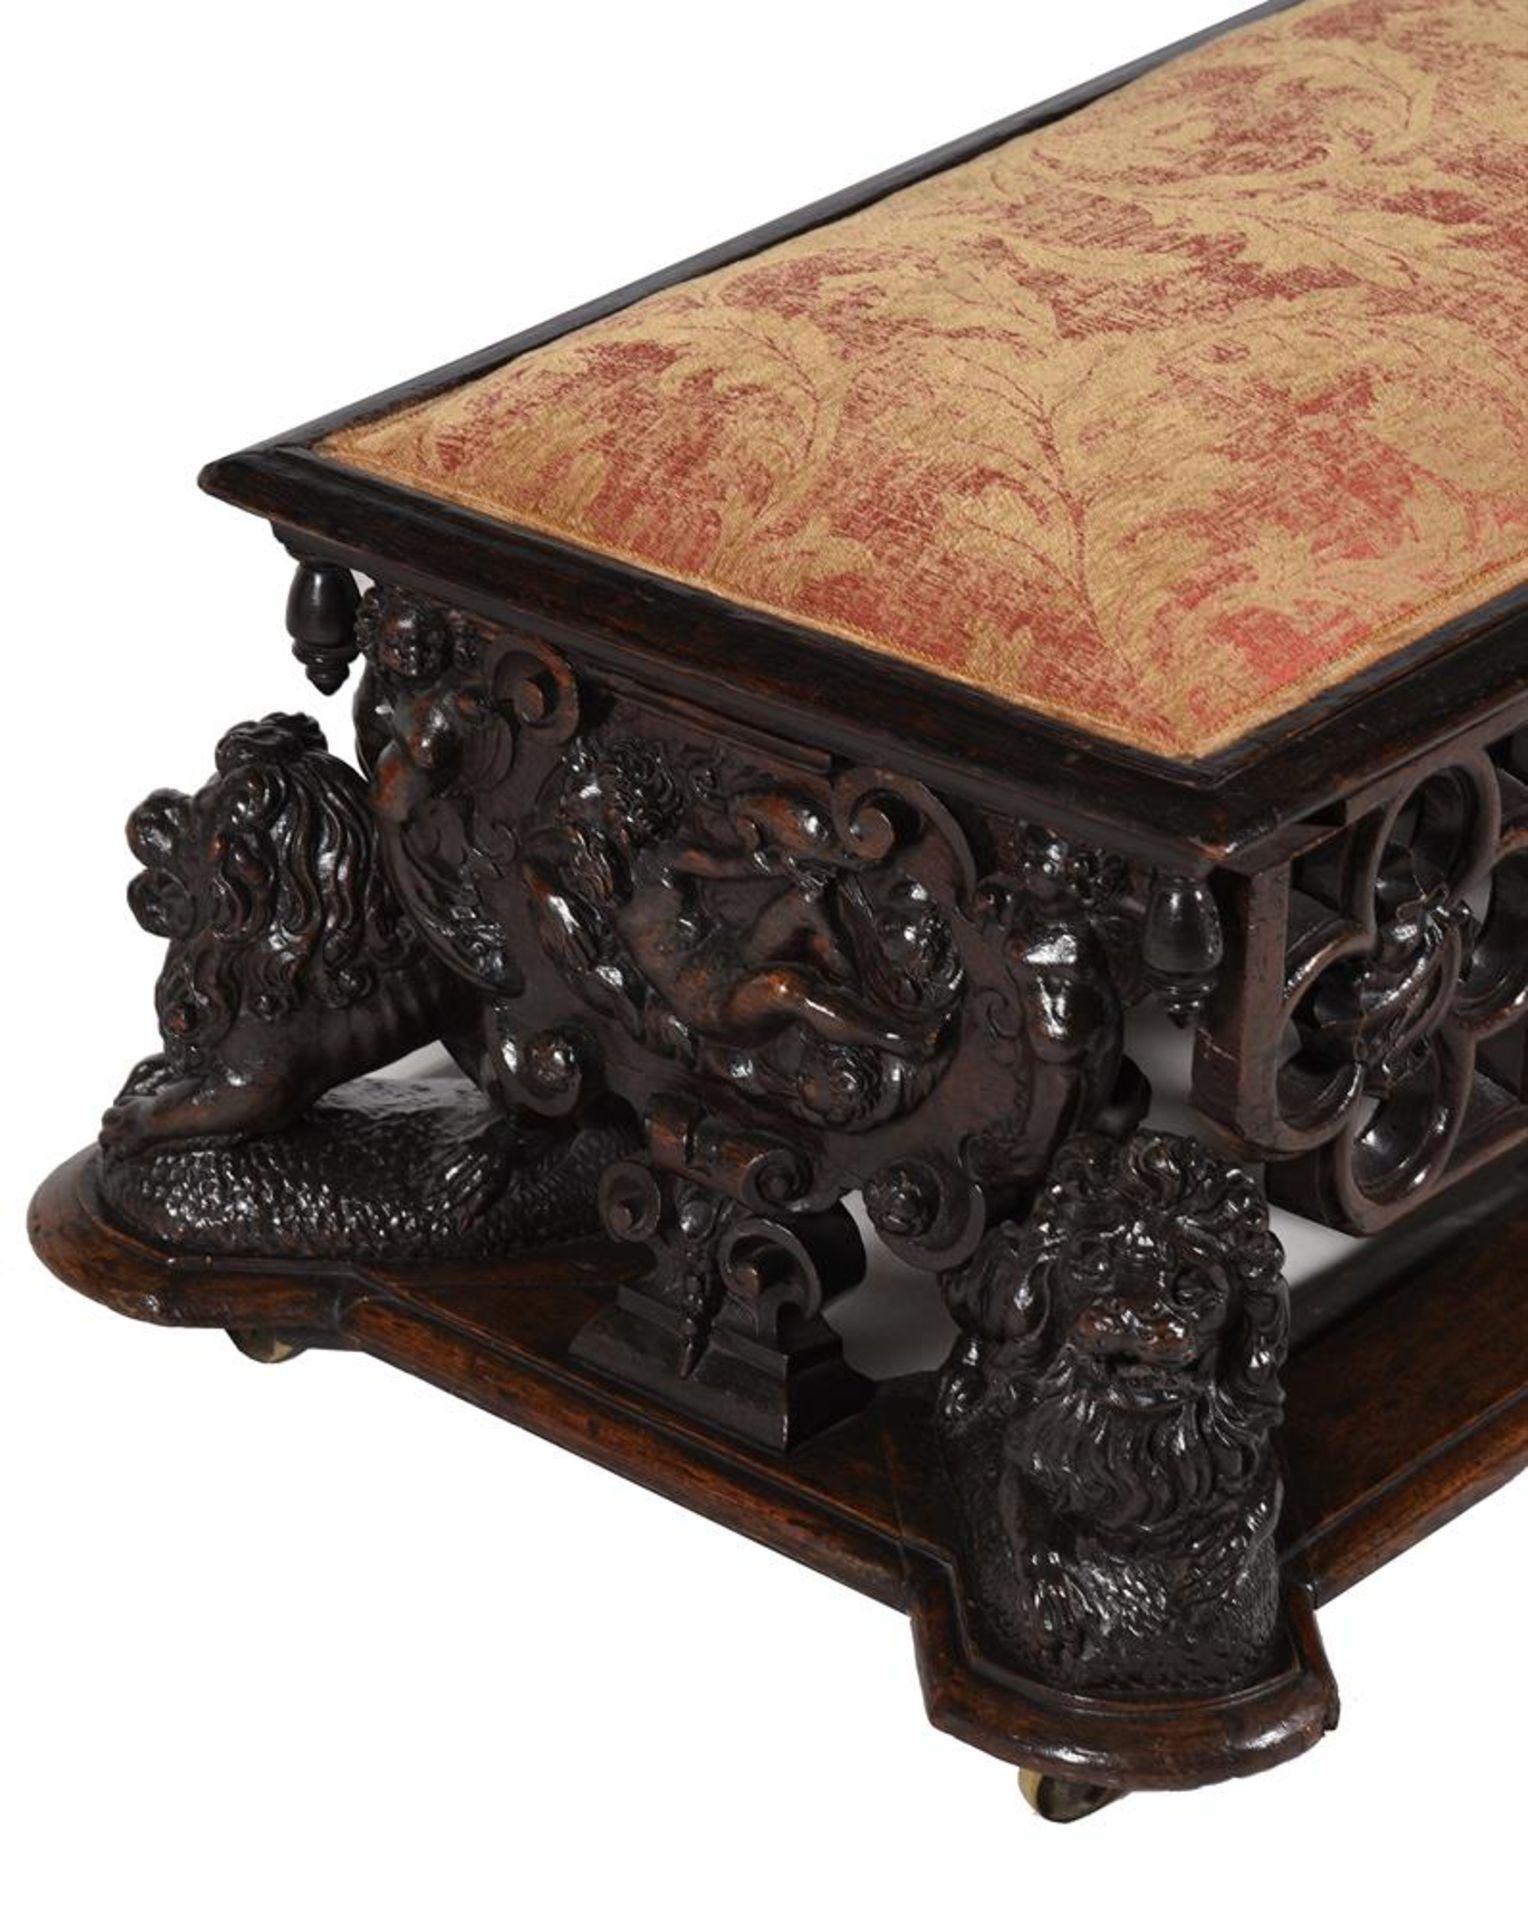 A CARVED OAK OTTOMAN STOOL, IN THE ANTIQUARIAN TASTE, 19TH CENTURY - Image 5 of 5